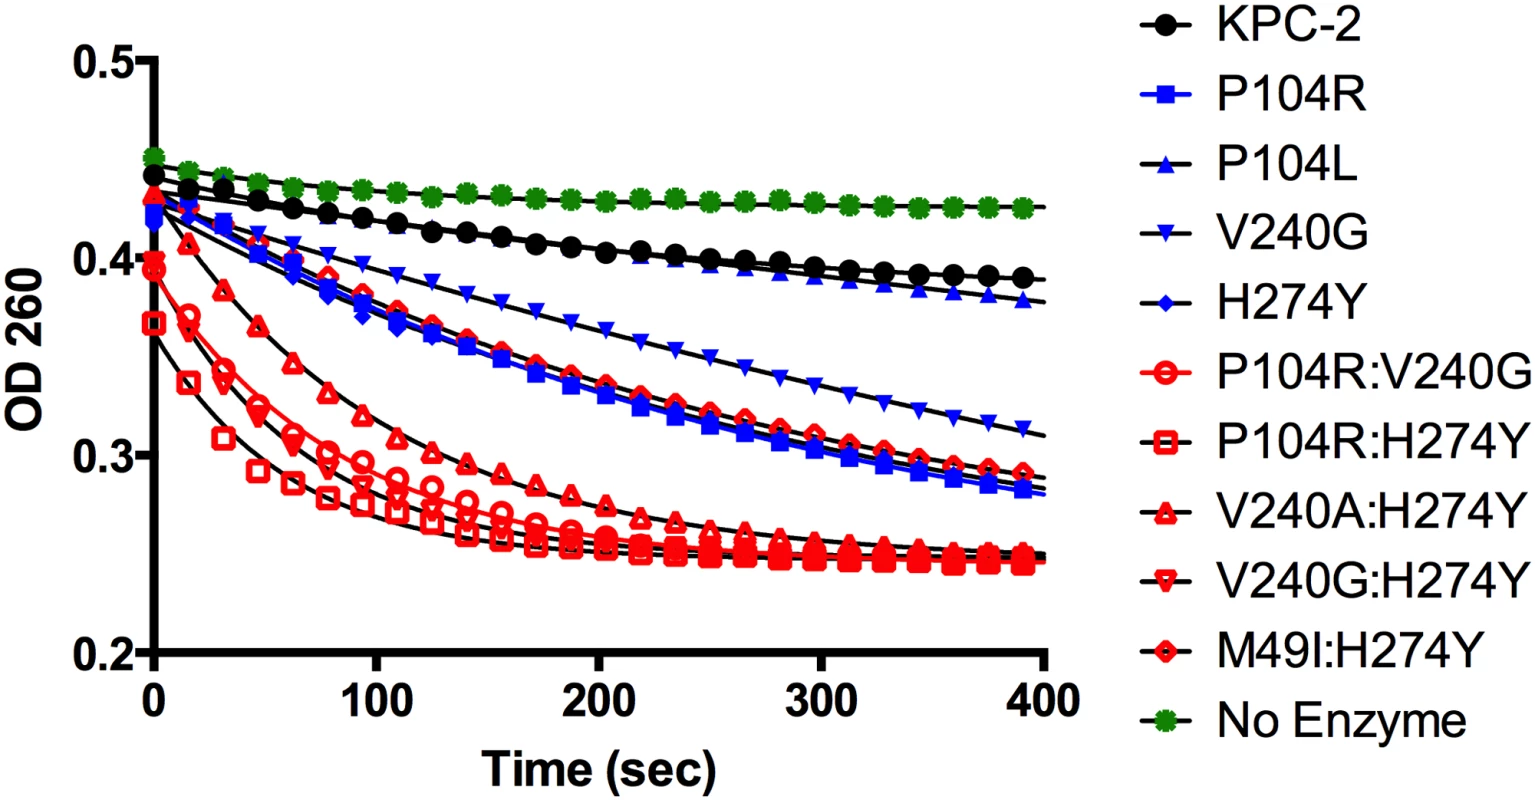 Progress curves of KPC-2 (black), single mutants (blue) and double mutants (red) and no enzyme control (green) for ceftazidime hydrolysis.